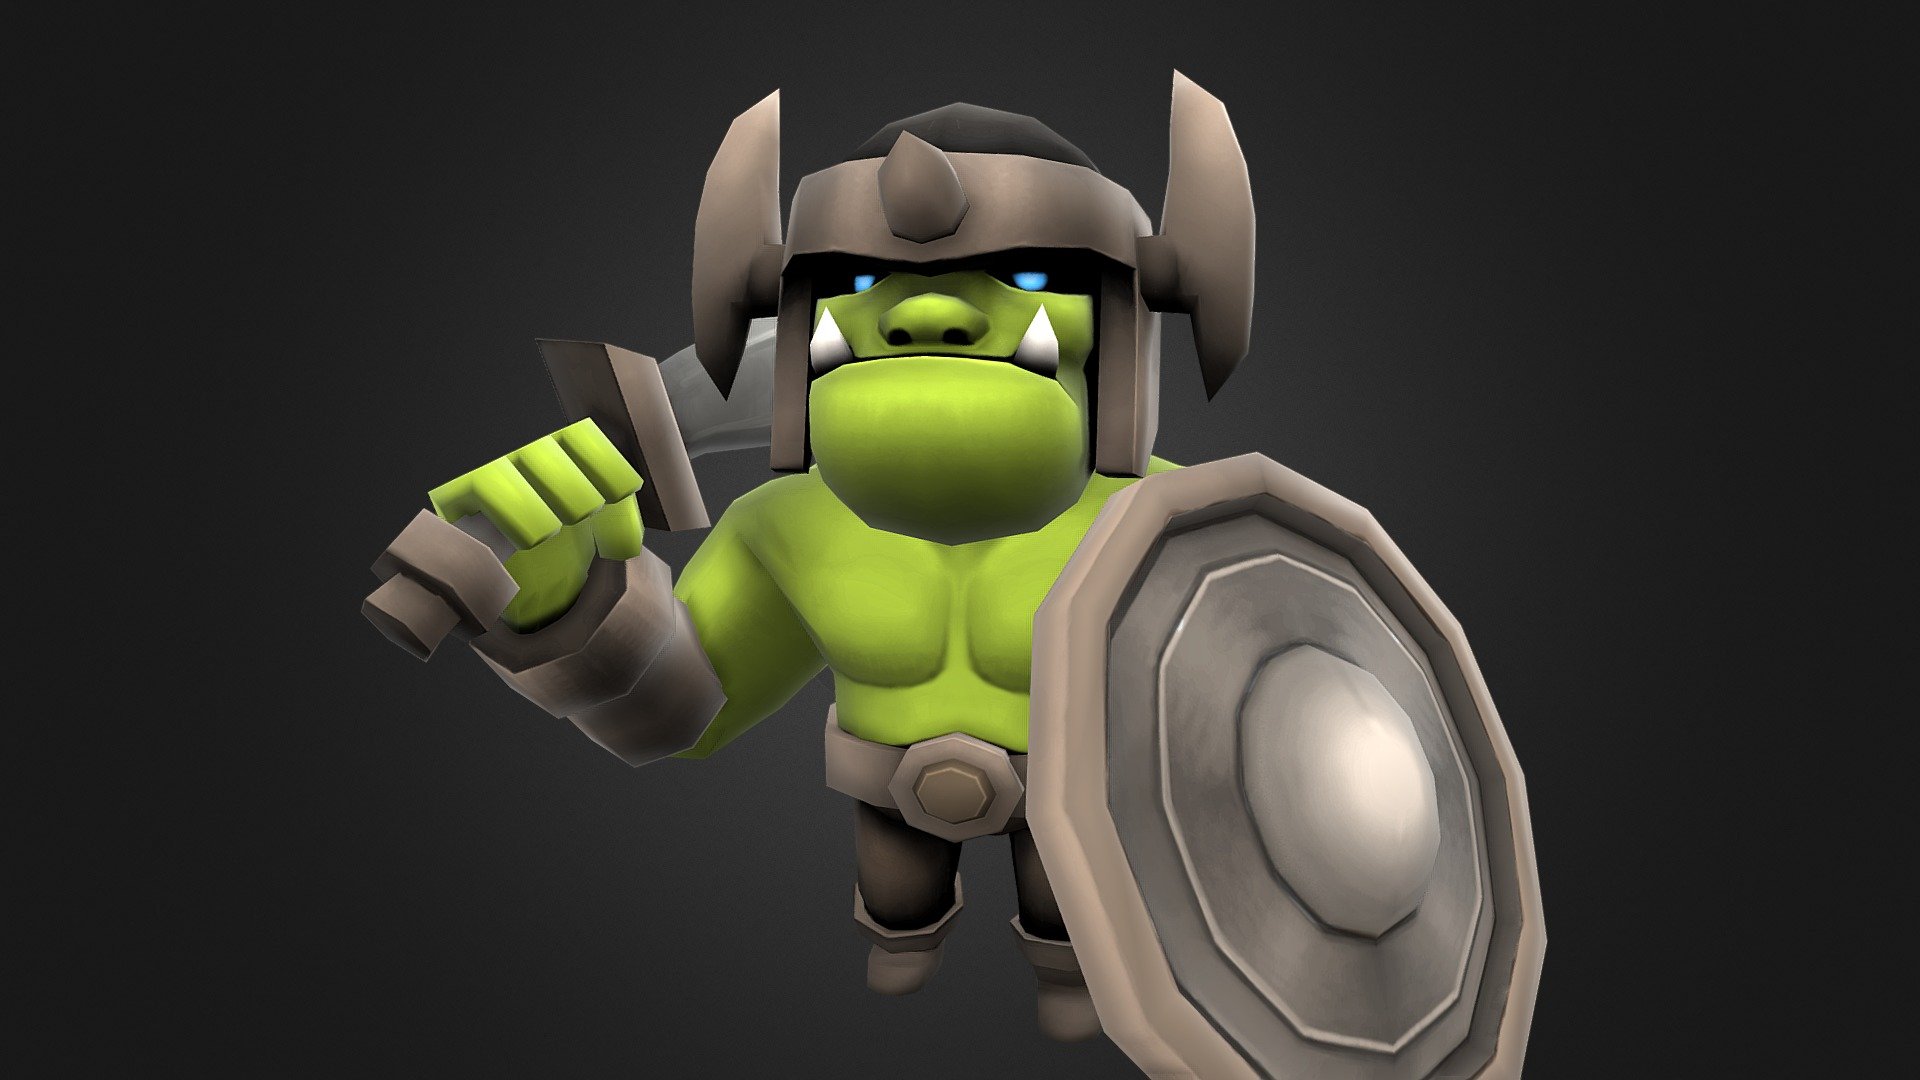 Supported Unity versions 2018.4.8 or higher

OrcSoldier (1787 vertex)

6 colors textures (2048x2048)

10 basic animations

Idle / Walk / Run / Attack x3 / Damage / Stunned / Die / GetUp

Animation Preview
https://youtu.be/SDUW0oLAxo4 - Poly HP - OrcSoldier - Buy Royalty Free 3D model by Downrain DC (@downraindc3d) 3d model